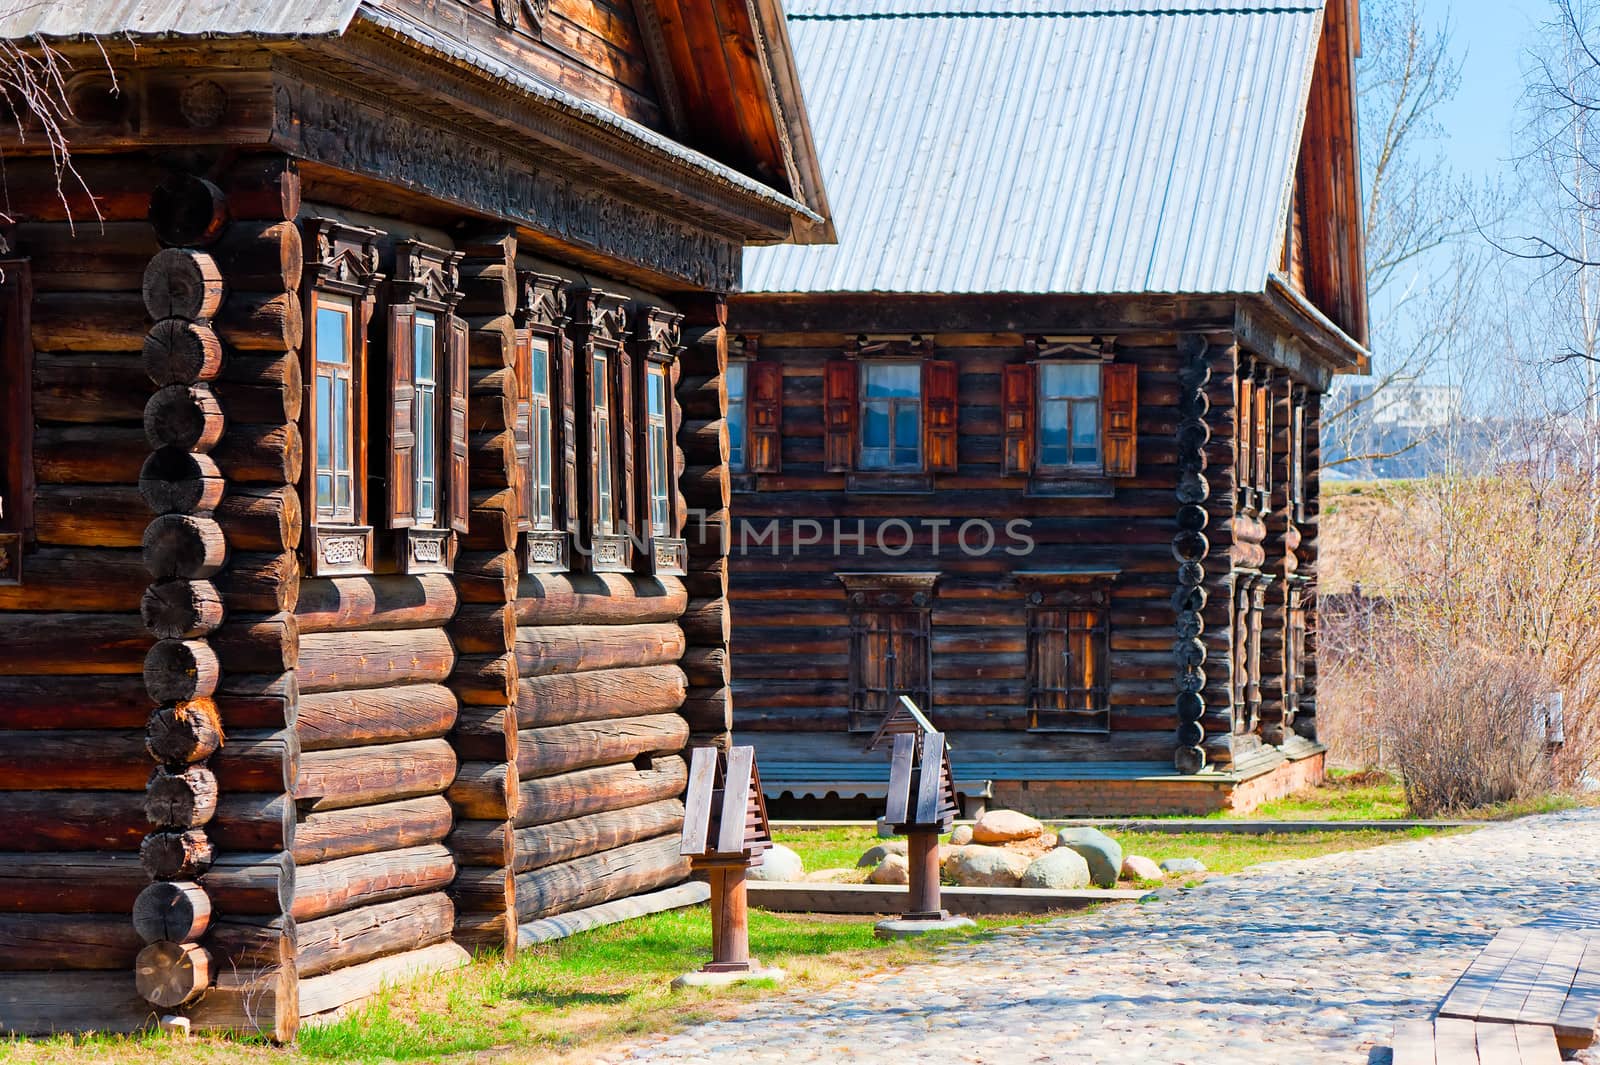 Facades Russian village of wooden houses in the old style